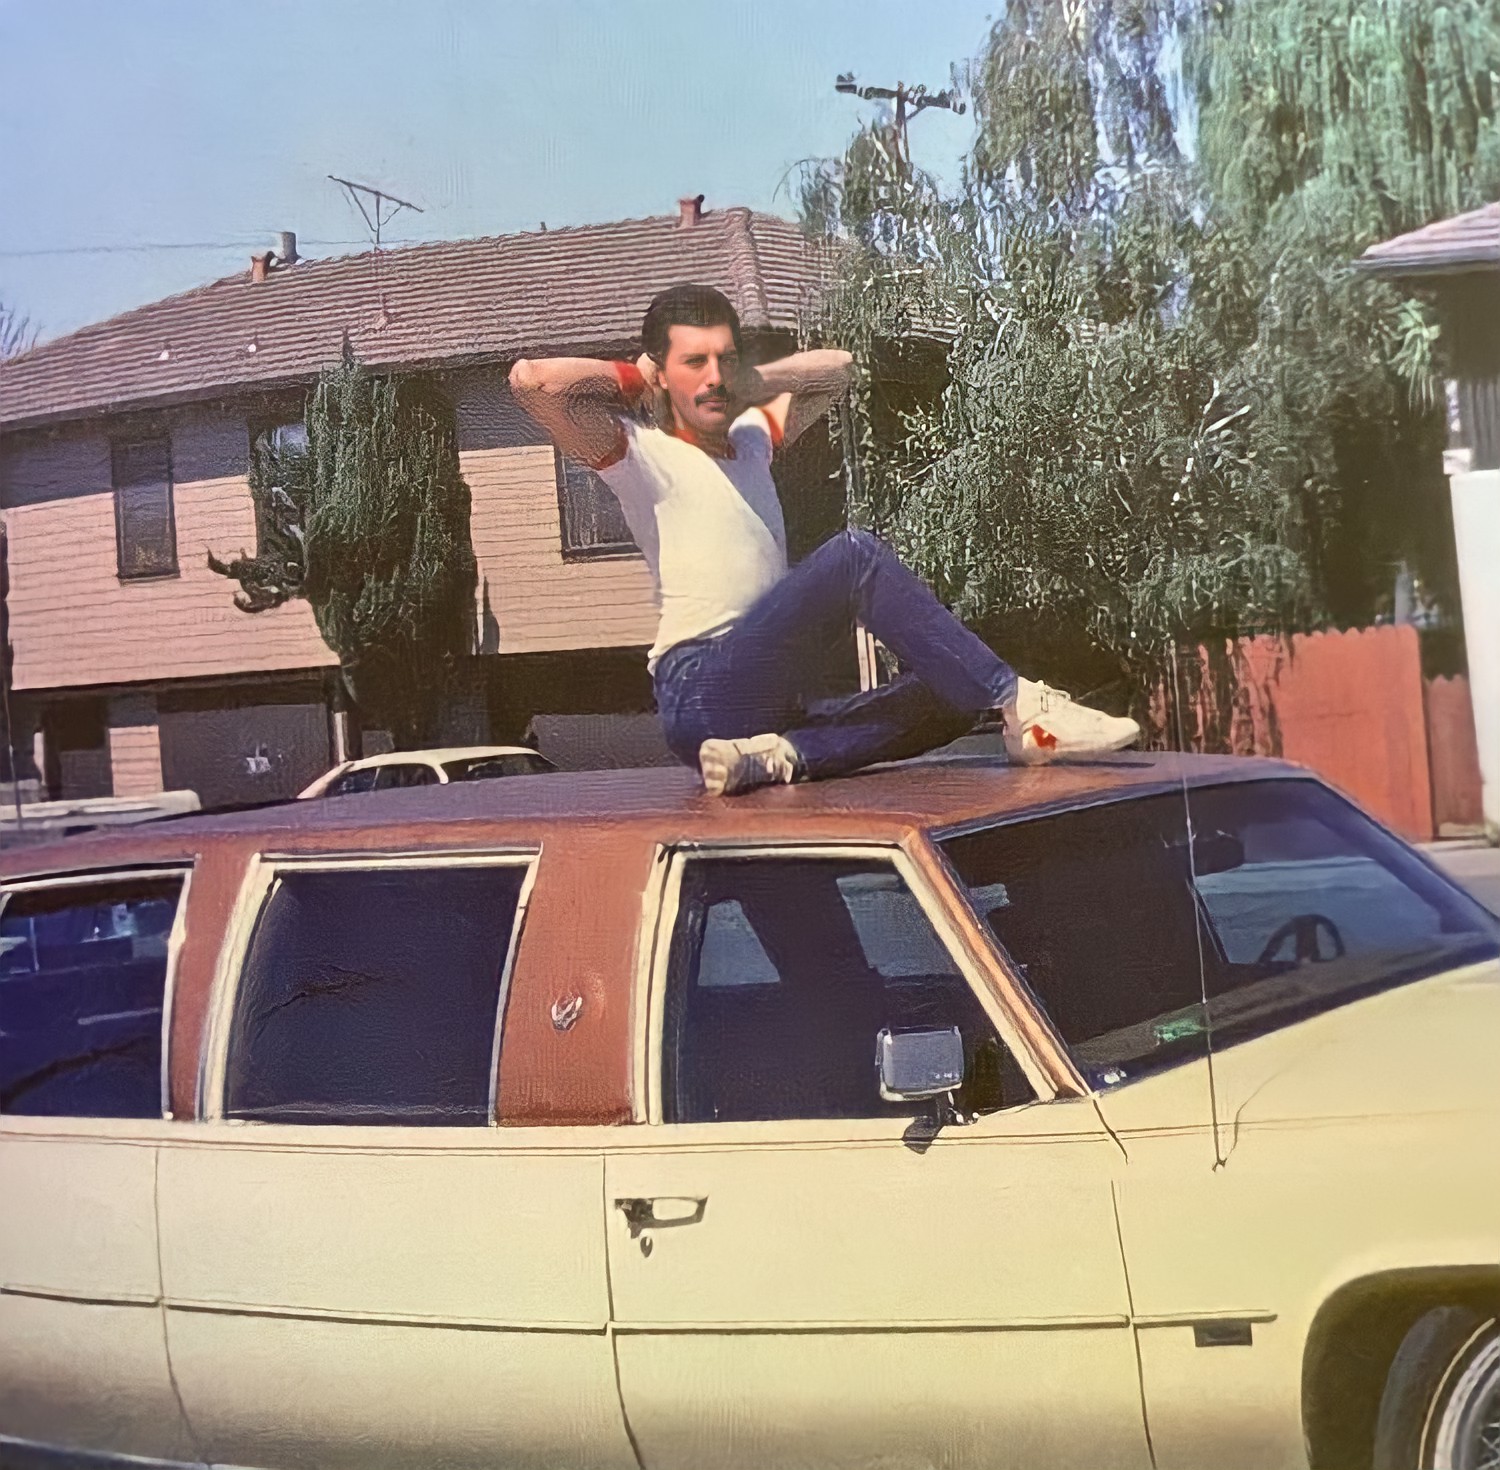 Lu☆ on Twitter: "Oh be as COOL, BADASS, and DIVA as Freddie Mercury on top of this car posing like the king of the world that he is: https://t.co/XakhO0efJk" / Twitter